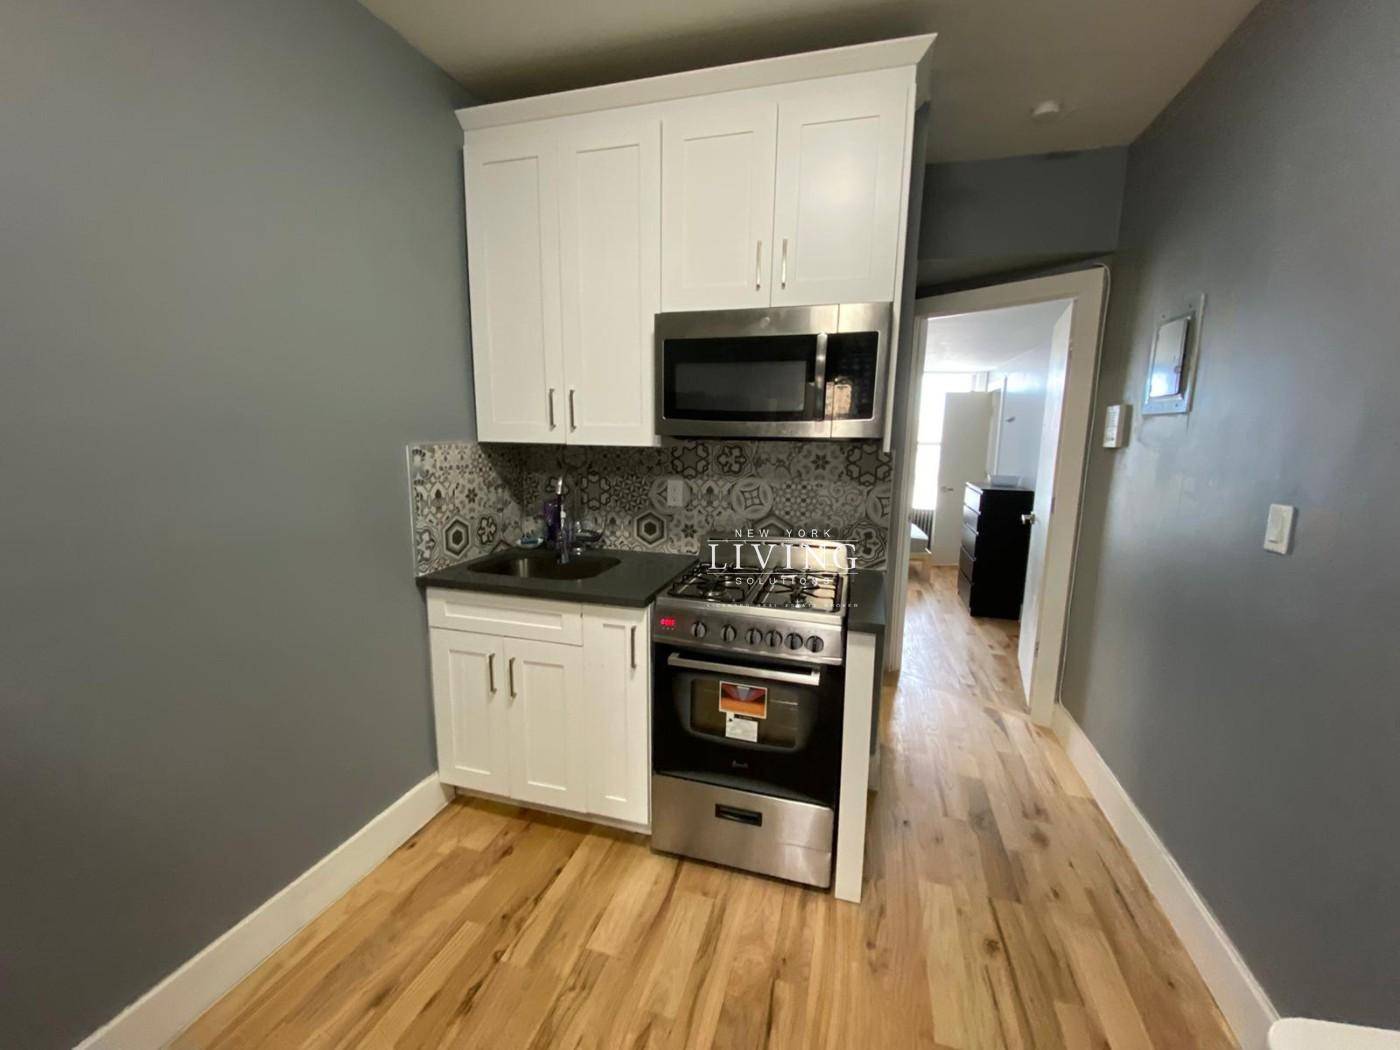 Bushwick 2 beds 2baths new kitchen high ceilings Stunning and Pristine 2 bedrooms 2 tiled bathrooms New kitchen new ss appliances high ceilings a block away from transportation conveniently next ...